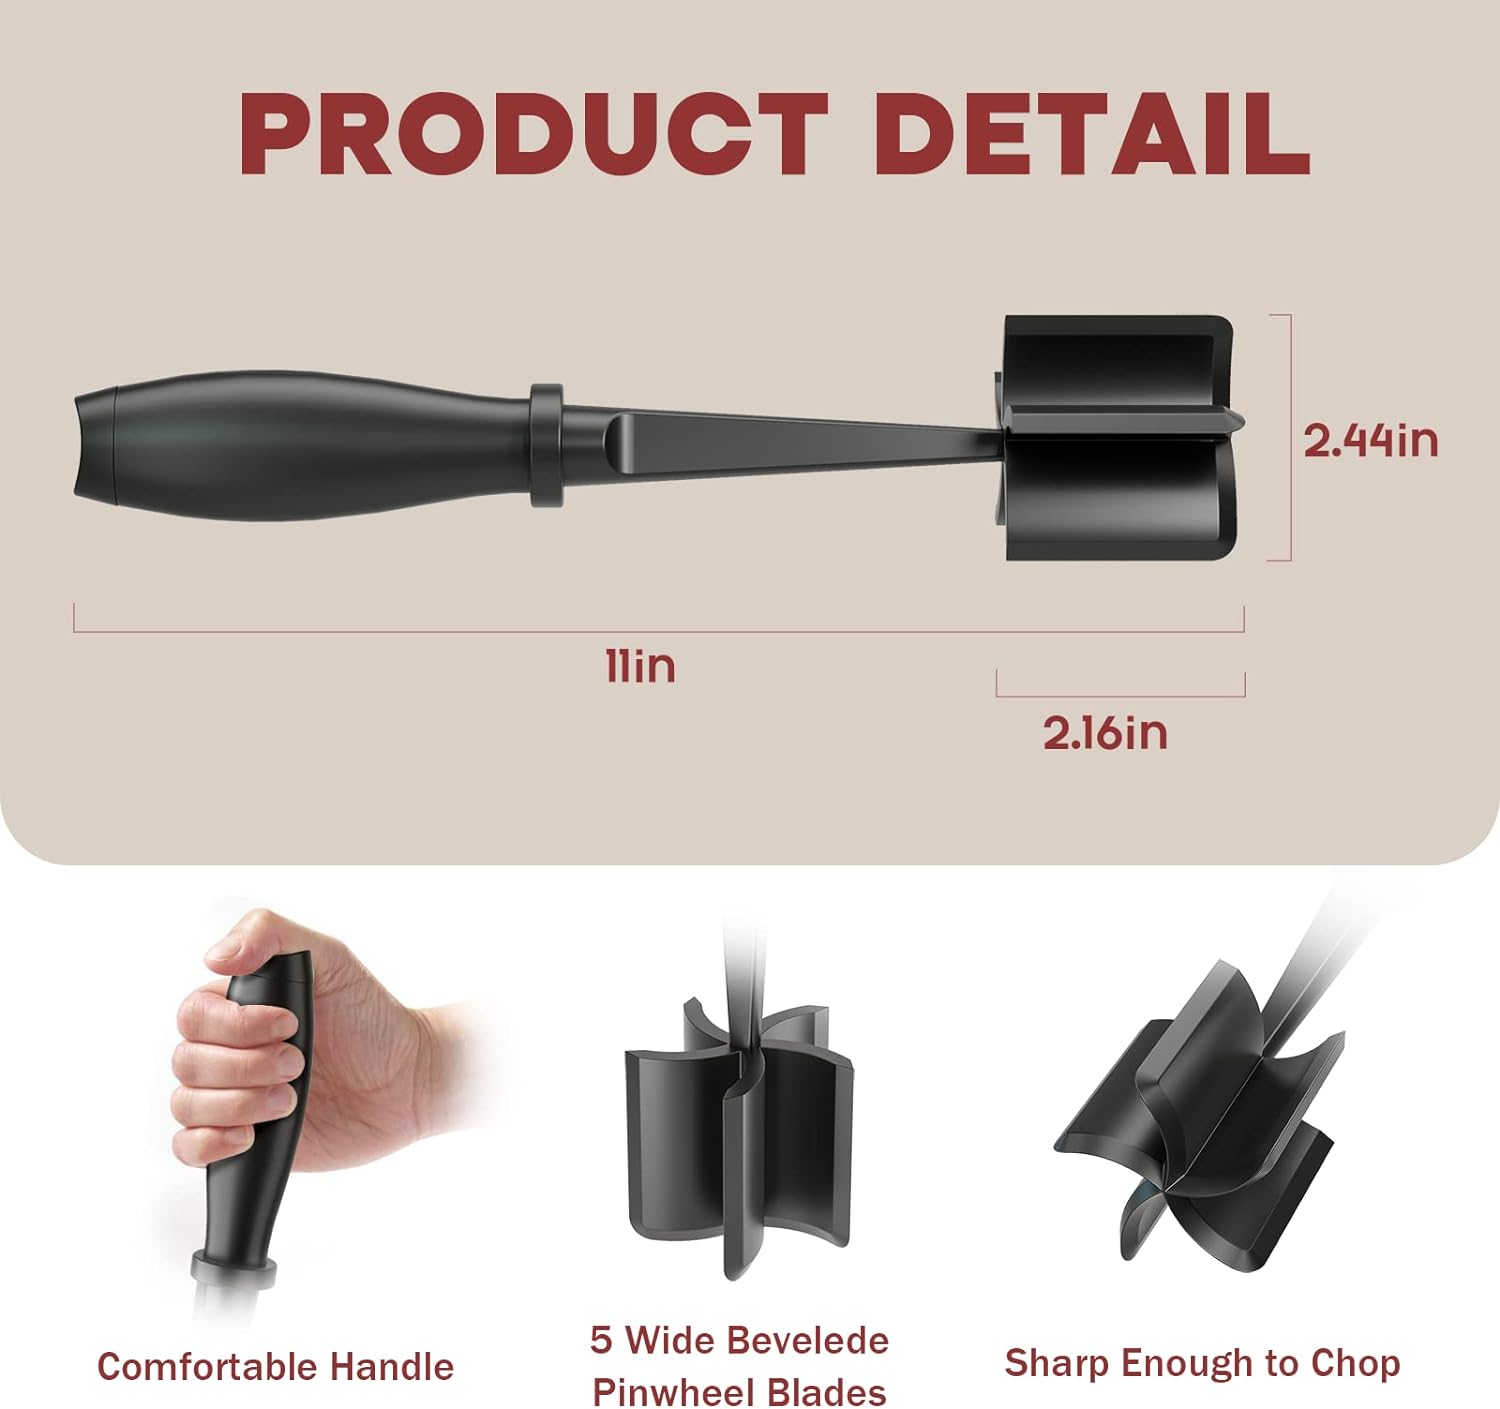 Wholesale prices with free shipping all over United States Meat Chopper for Hamburger, Premium Heat Resistant Masher and Smasher for Ground Beef, Ground Turkey and More, Nylon Ground Beef Chopper Tool and Meat Fork, Non Stick Mix Chopper - Steven Deals